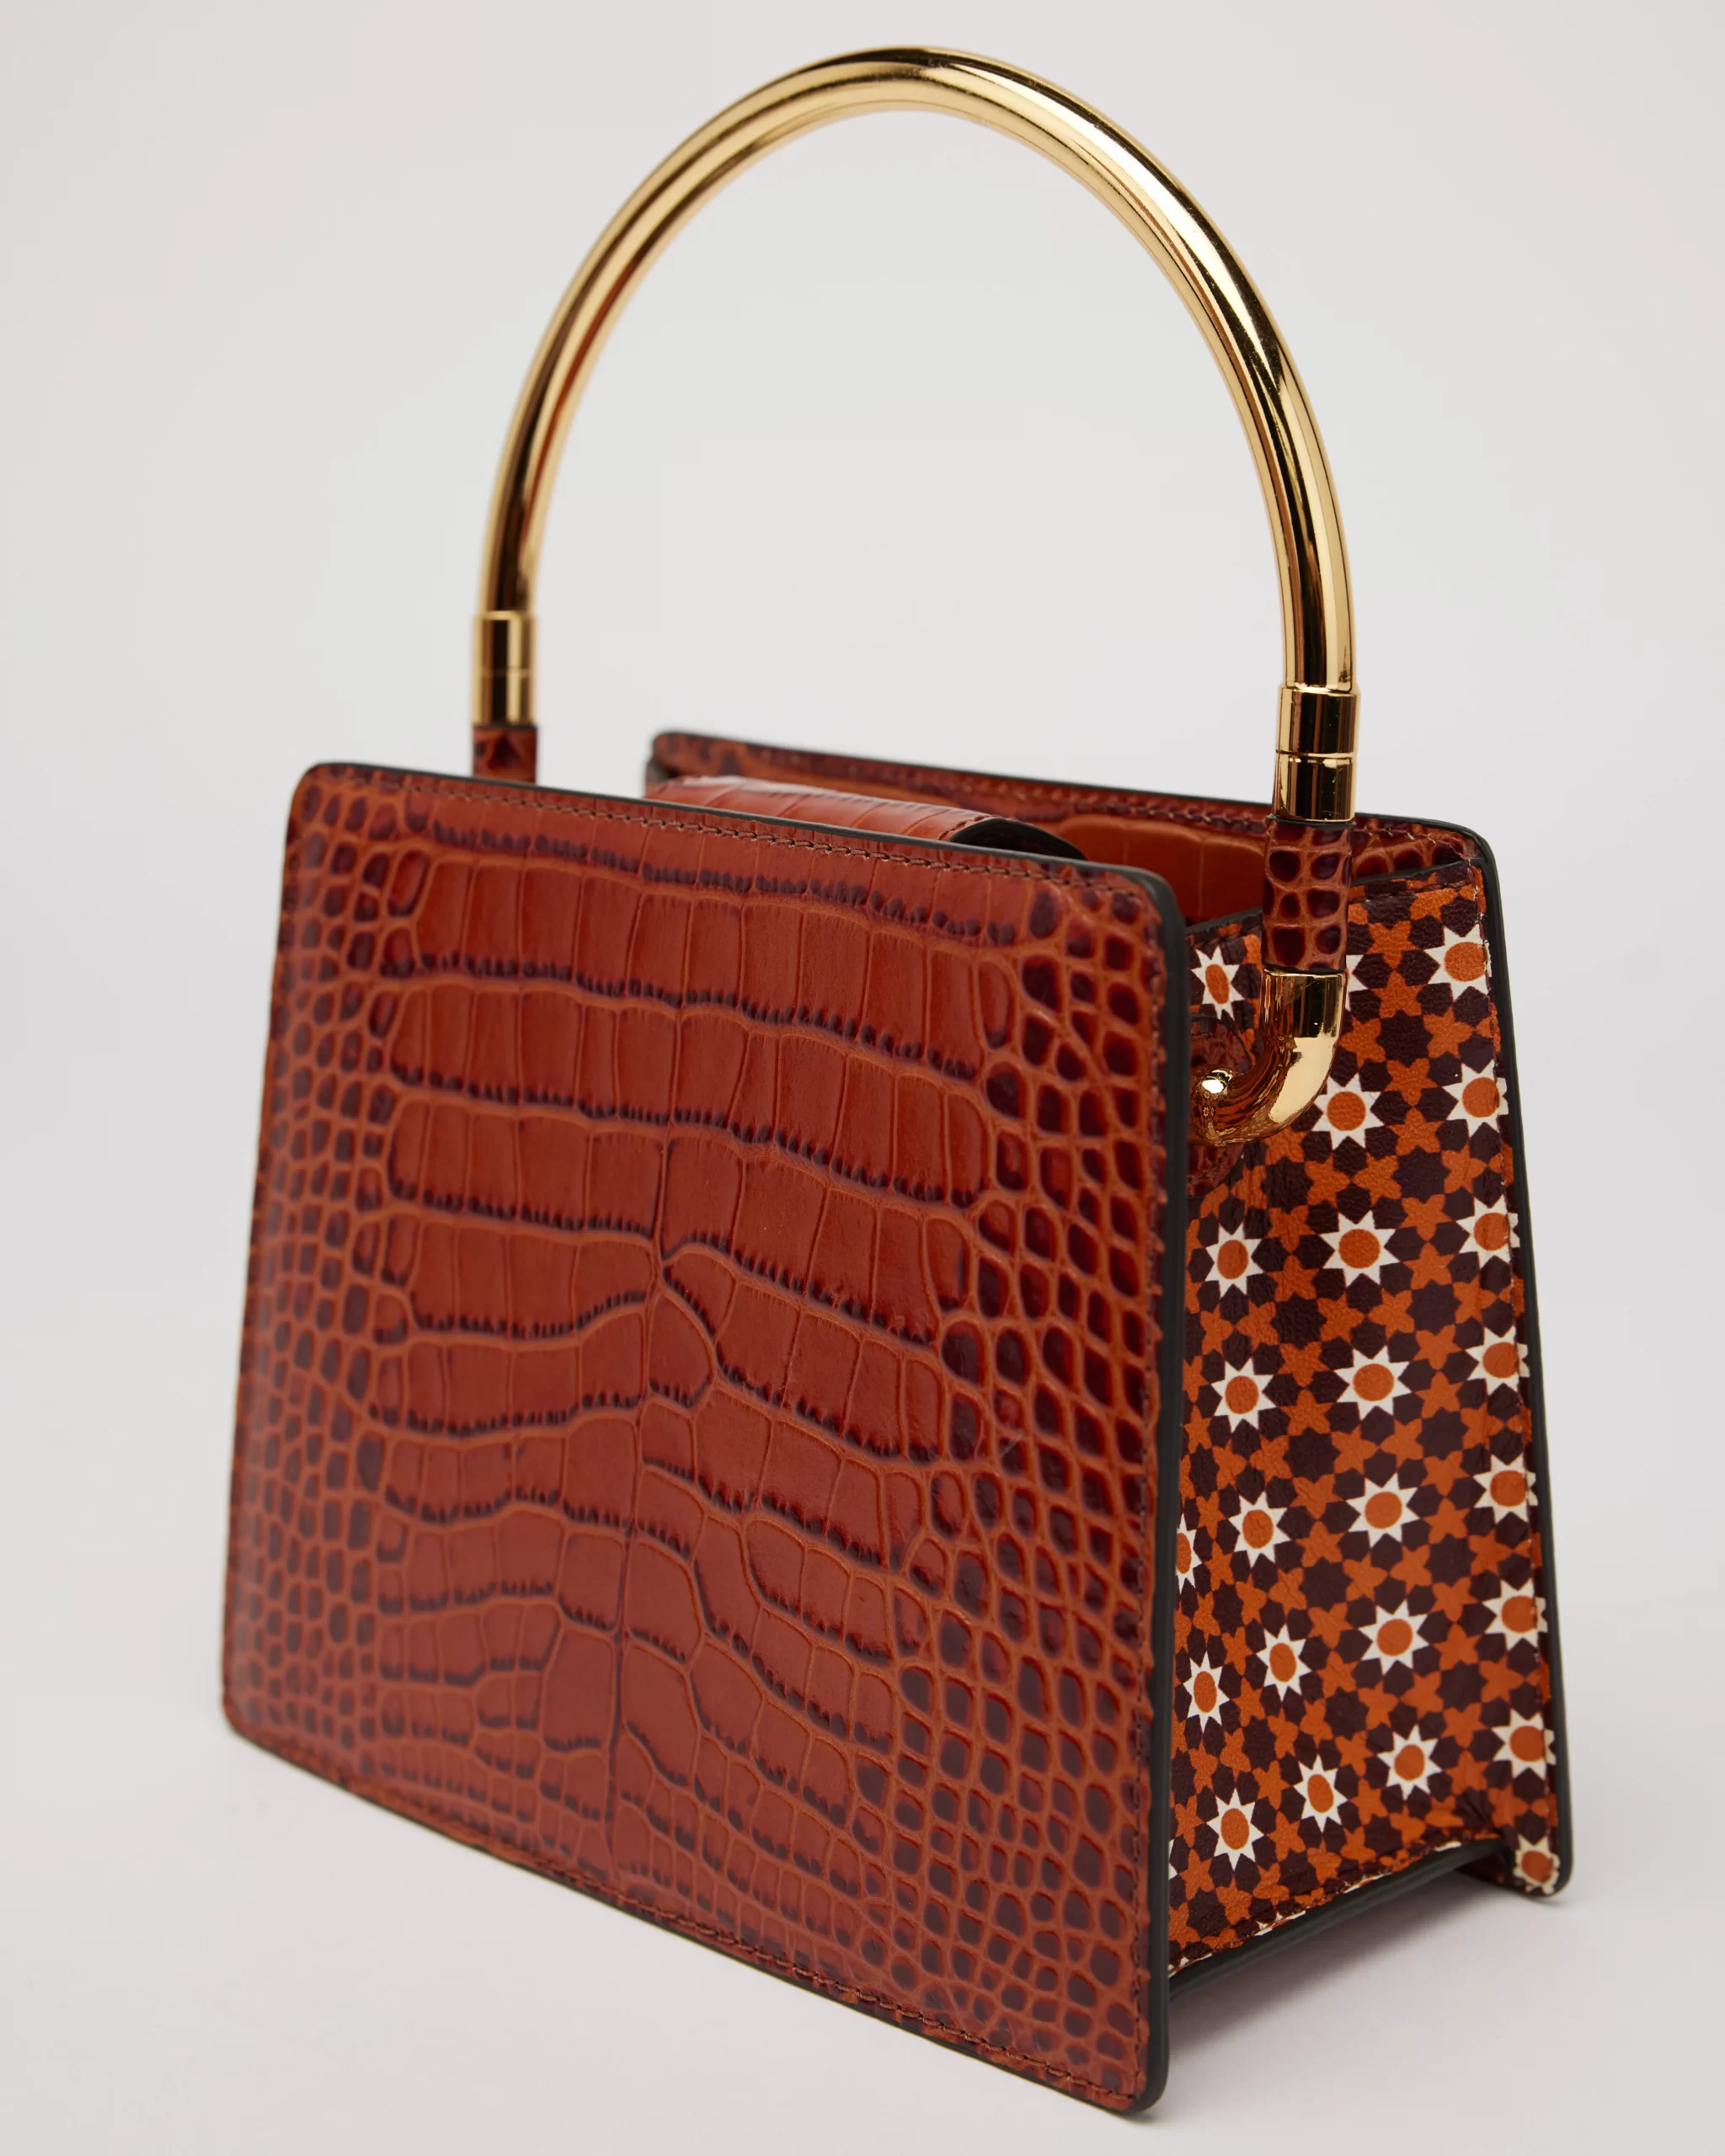 A beautifully handcrafted Italian leather handbag carefully made using a unique vintage washed process giving it an outstanding finish. This luxurious classy small bag with golden details closed with a golden button has a croco print and the front flap is made out of fake fur. Inside there is an extra compartment that closes with a zipper and there is a long handle to carry the bag with you.